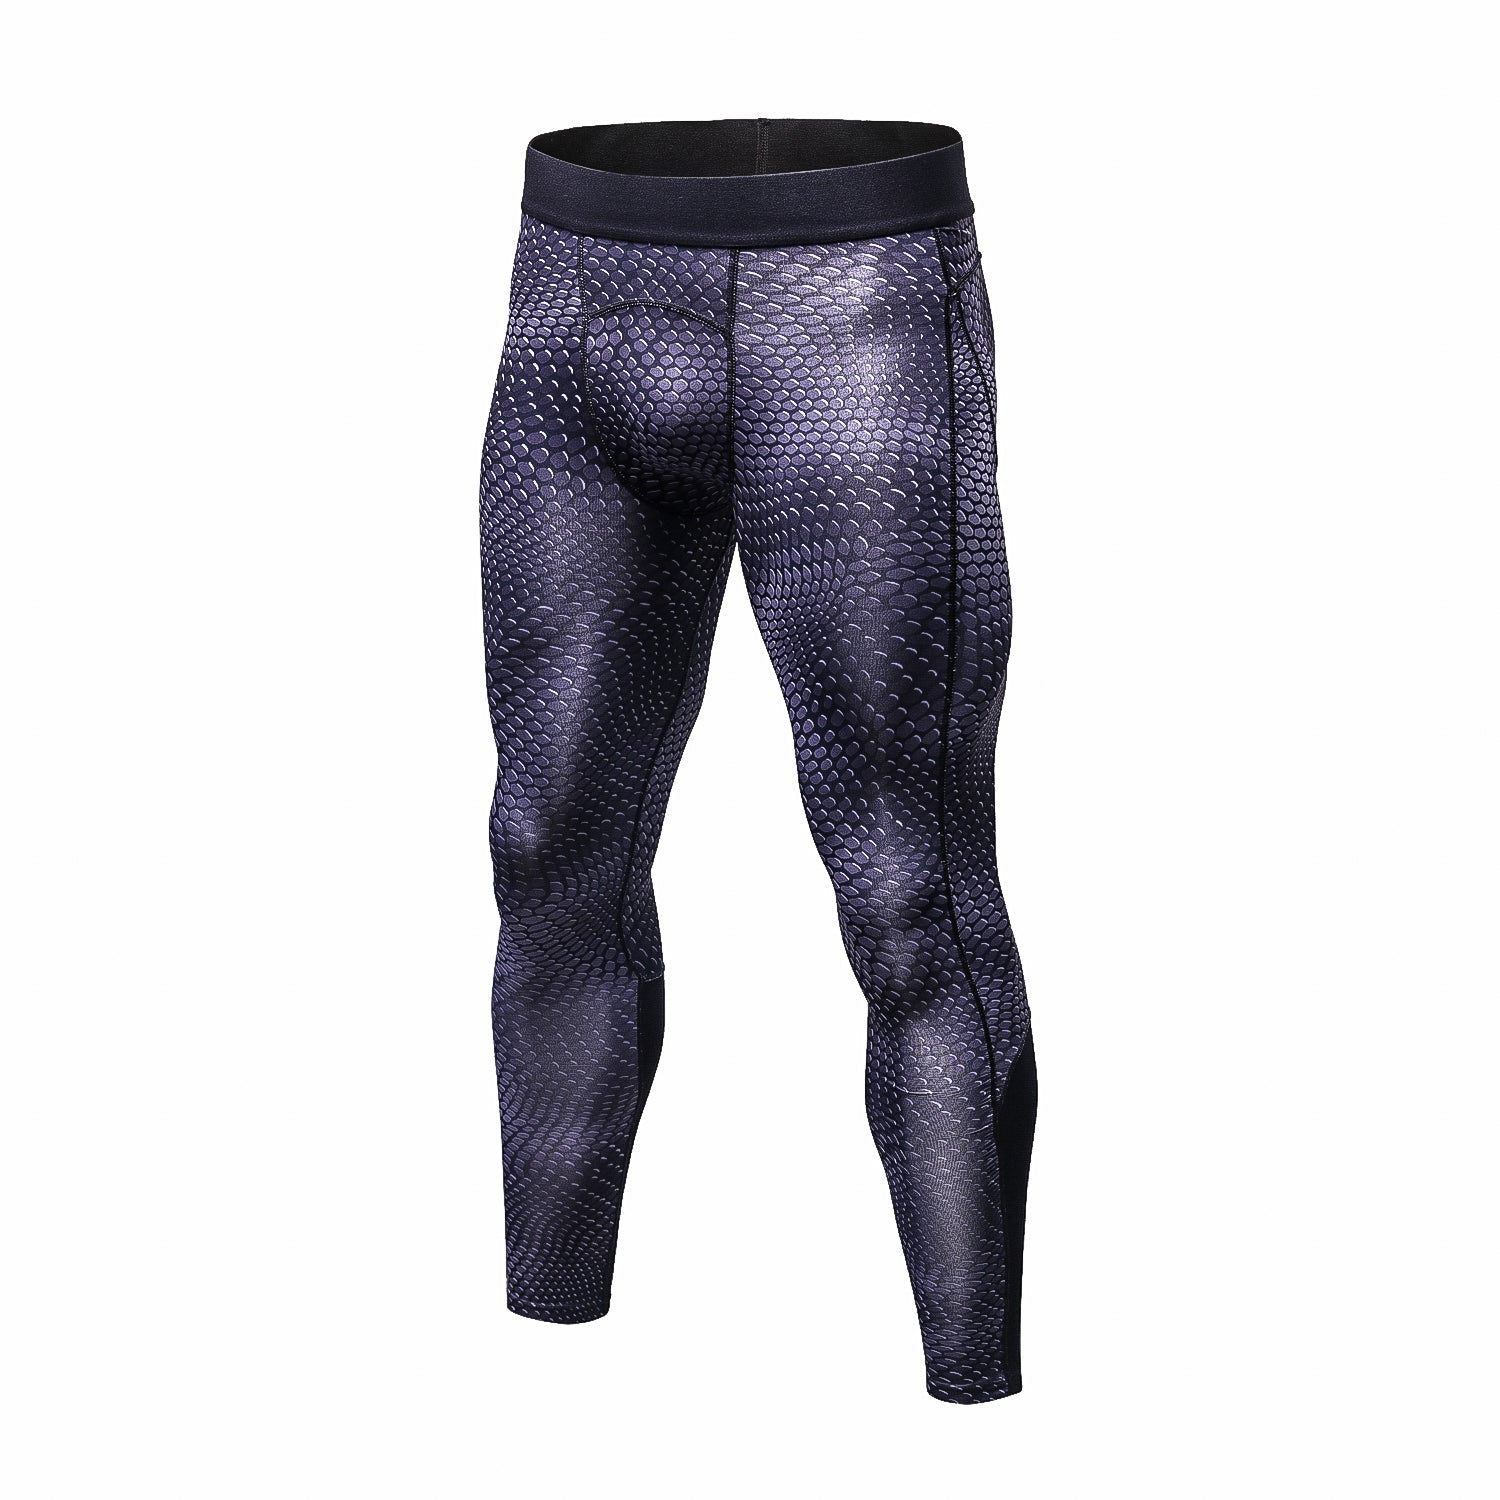 Ropalia Men's Sports Skin Tights Compression Base Under Layer Pants